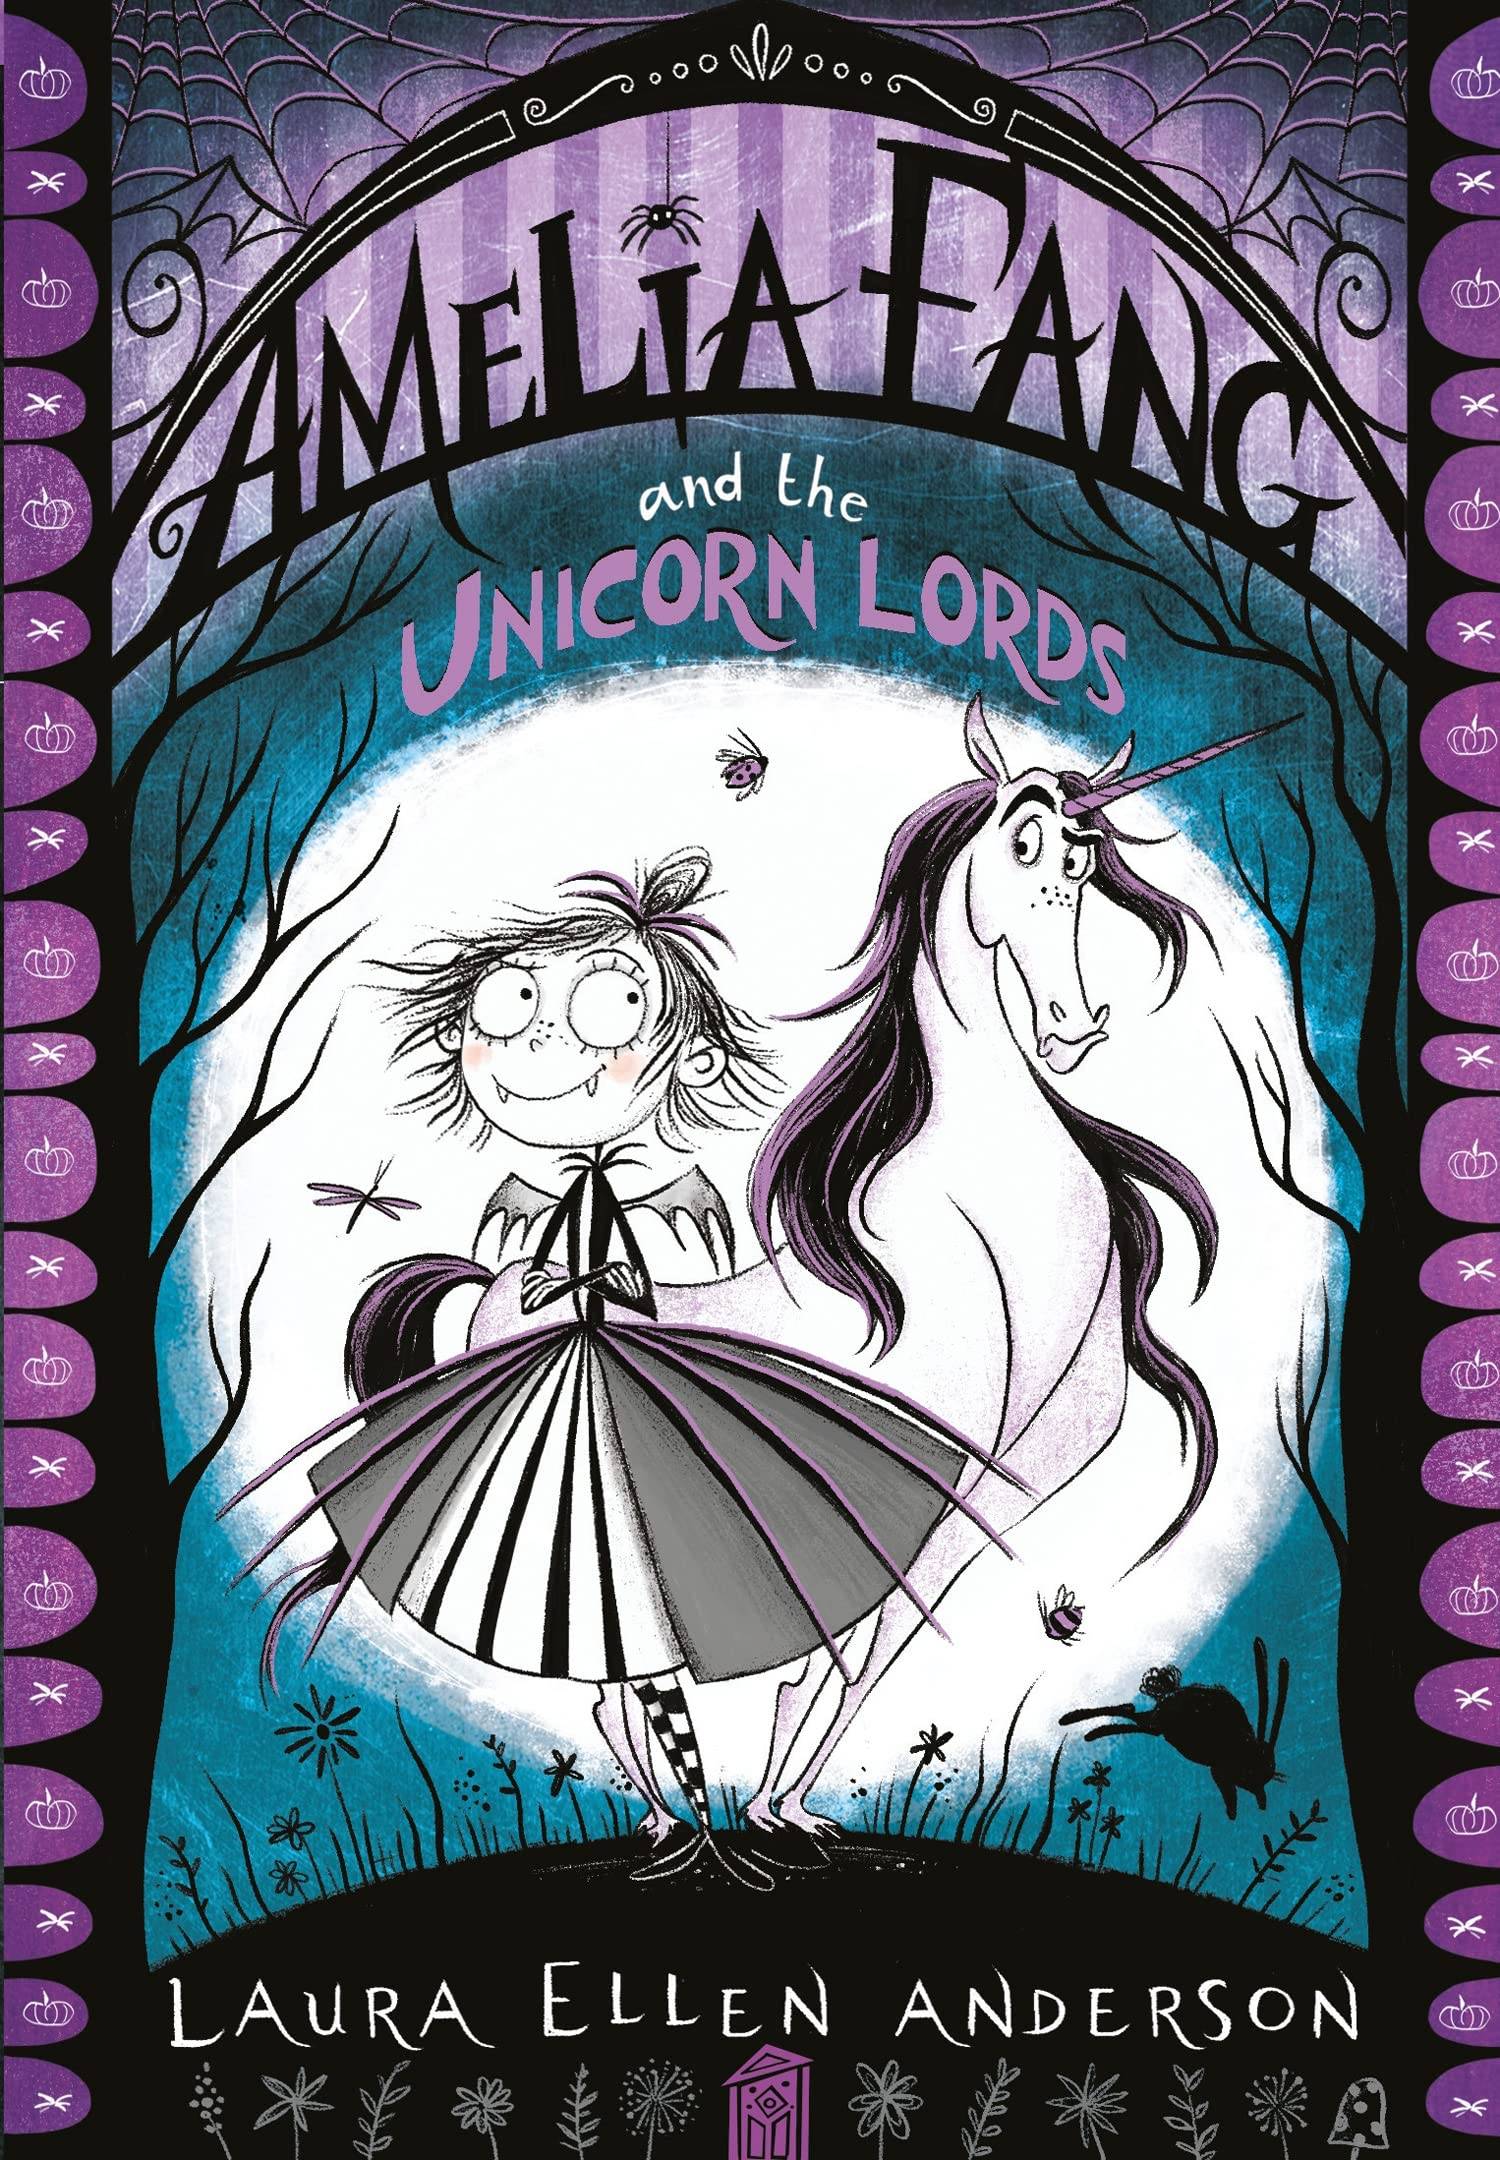 IMG : Amelia Fang and the Unicorn Lords